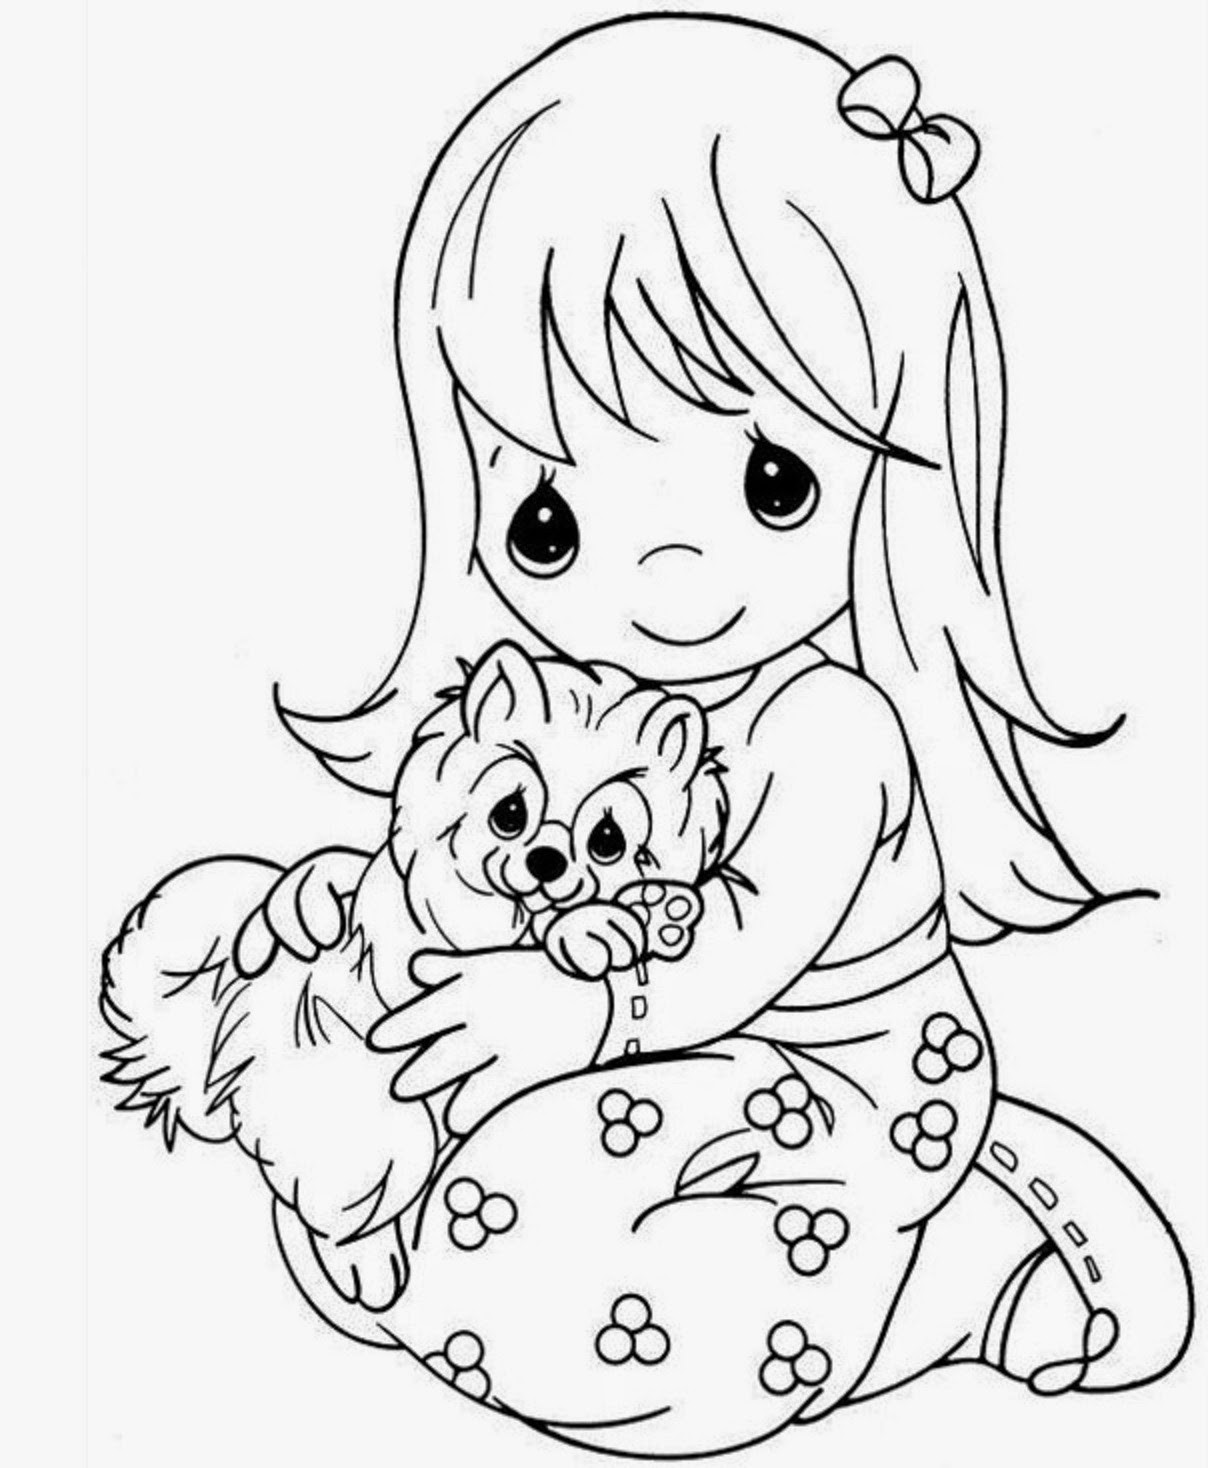 coloring : Free Puppy Coloring Pages Beautiful Little Girl Hugging Puppy Coloring  Page Free Printable Free Puppy Coloring Pages ~ queens